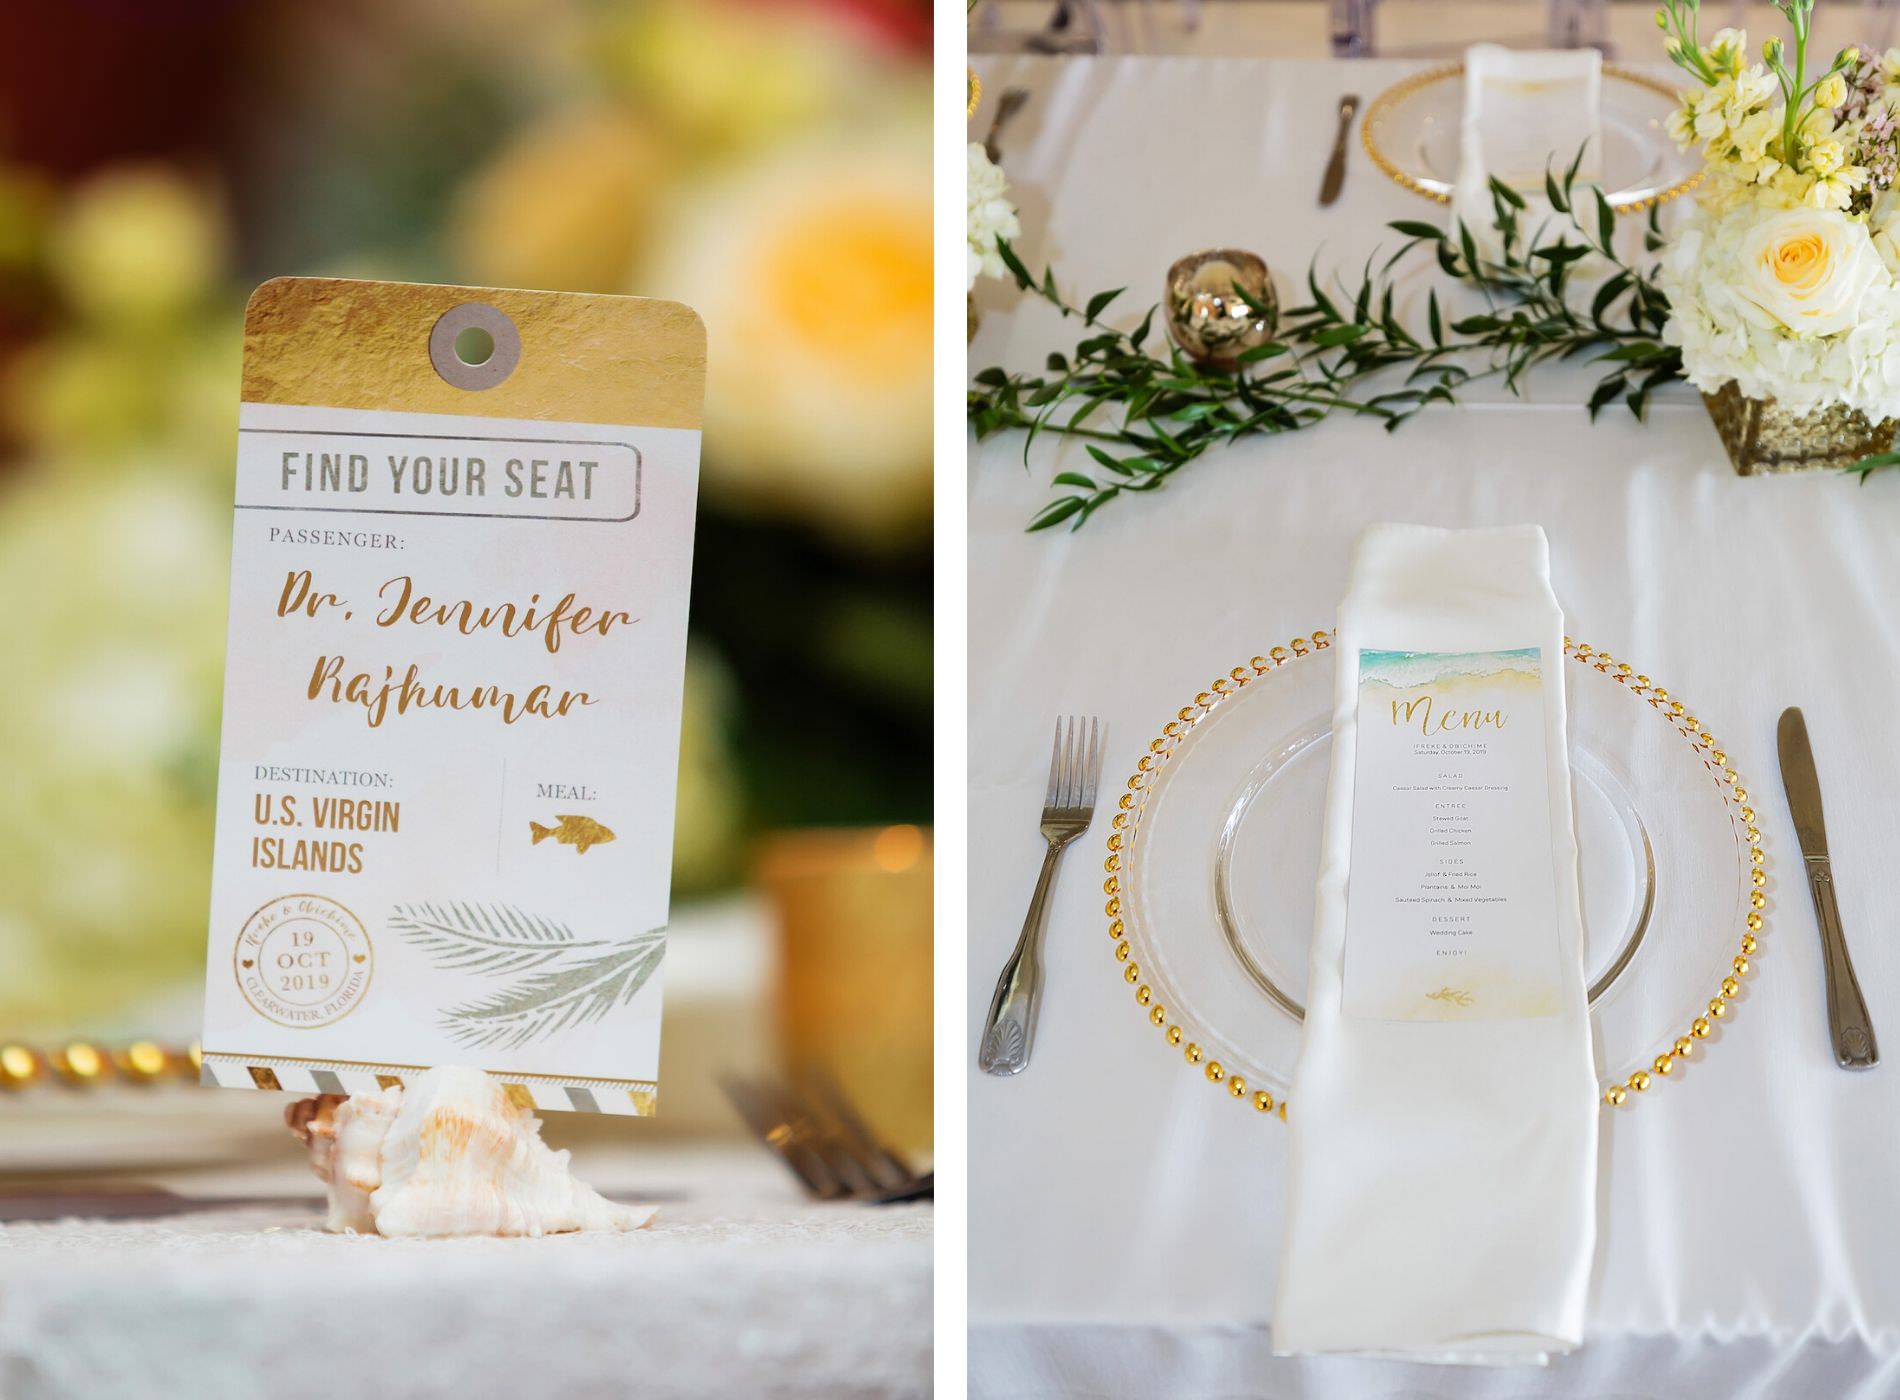 Travel Themed Wedding Reception Decor, Custom Airplane Ticket Seating Cards, Gold Beaded Chargers, White Linens, Custom Dinner Menu | Tampa Bay Wedding Planner Special Moments Event Planning | Wedding Rentals Gabro Event Services